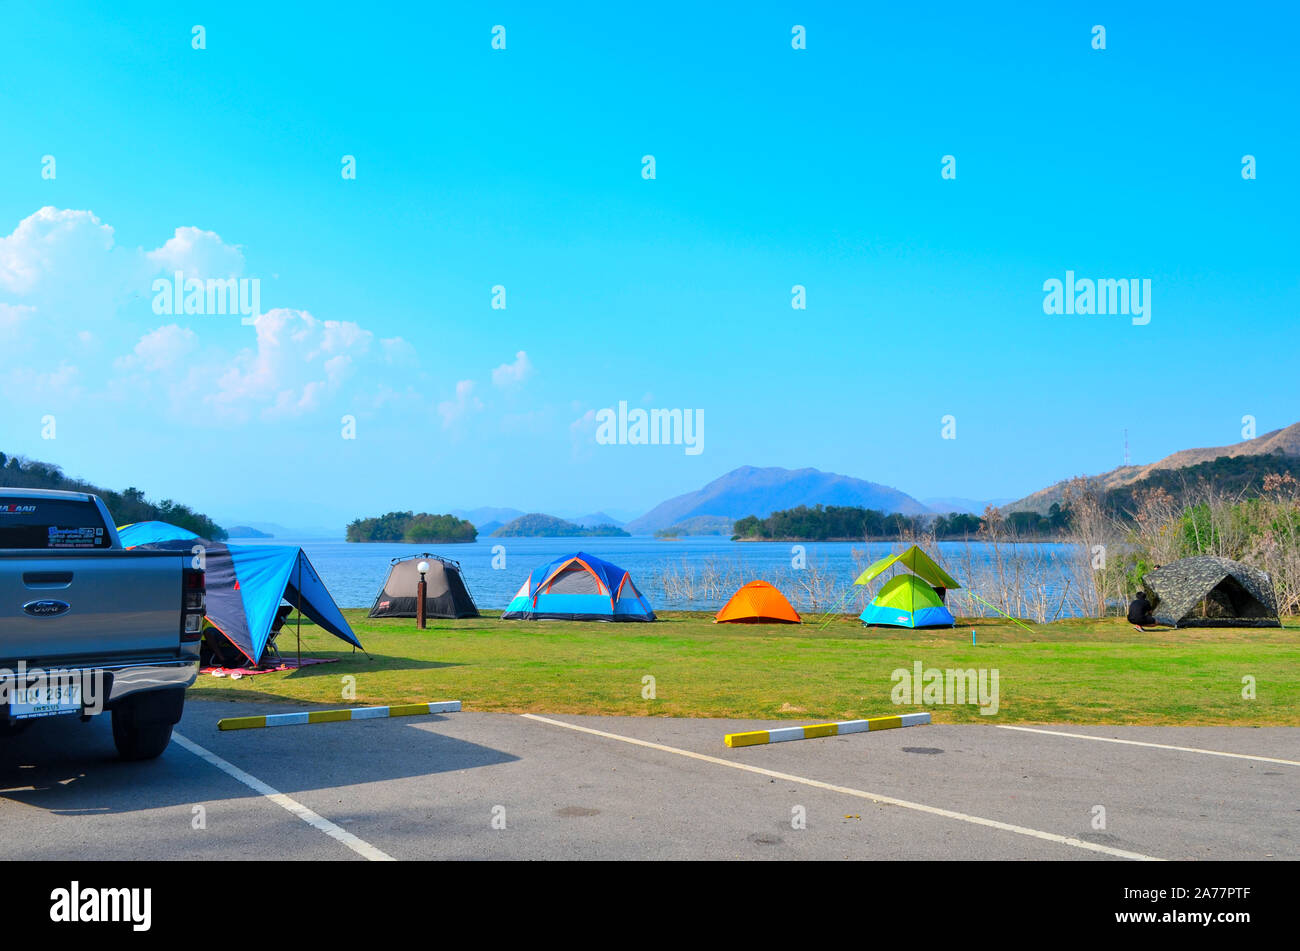 Tents that people have set up for a weekend away at Kaeng Krachan Dam in Petchaburi Thailand Stock Photo